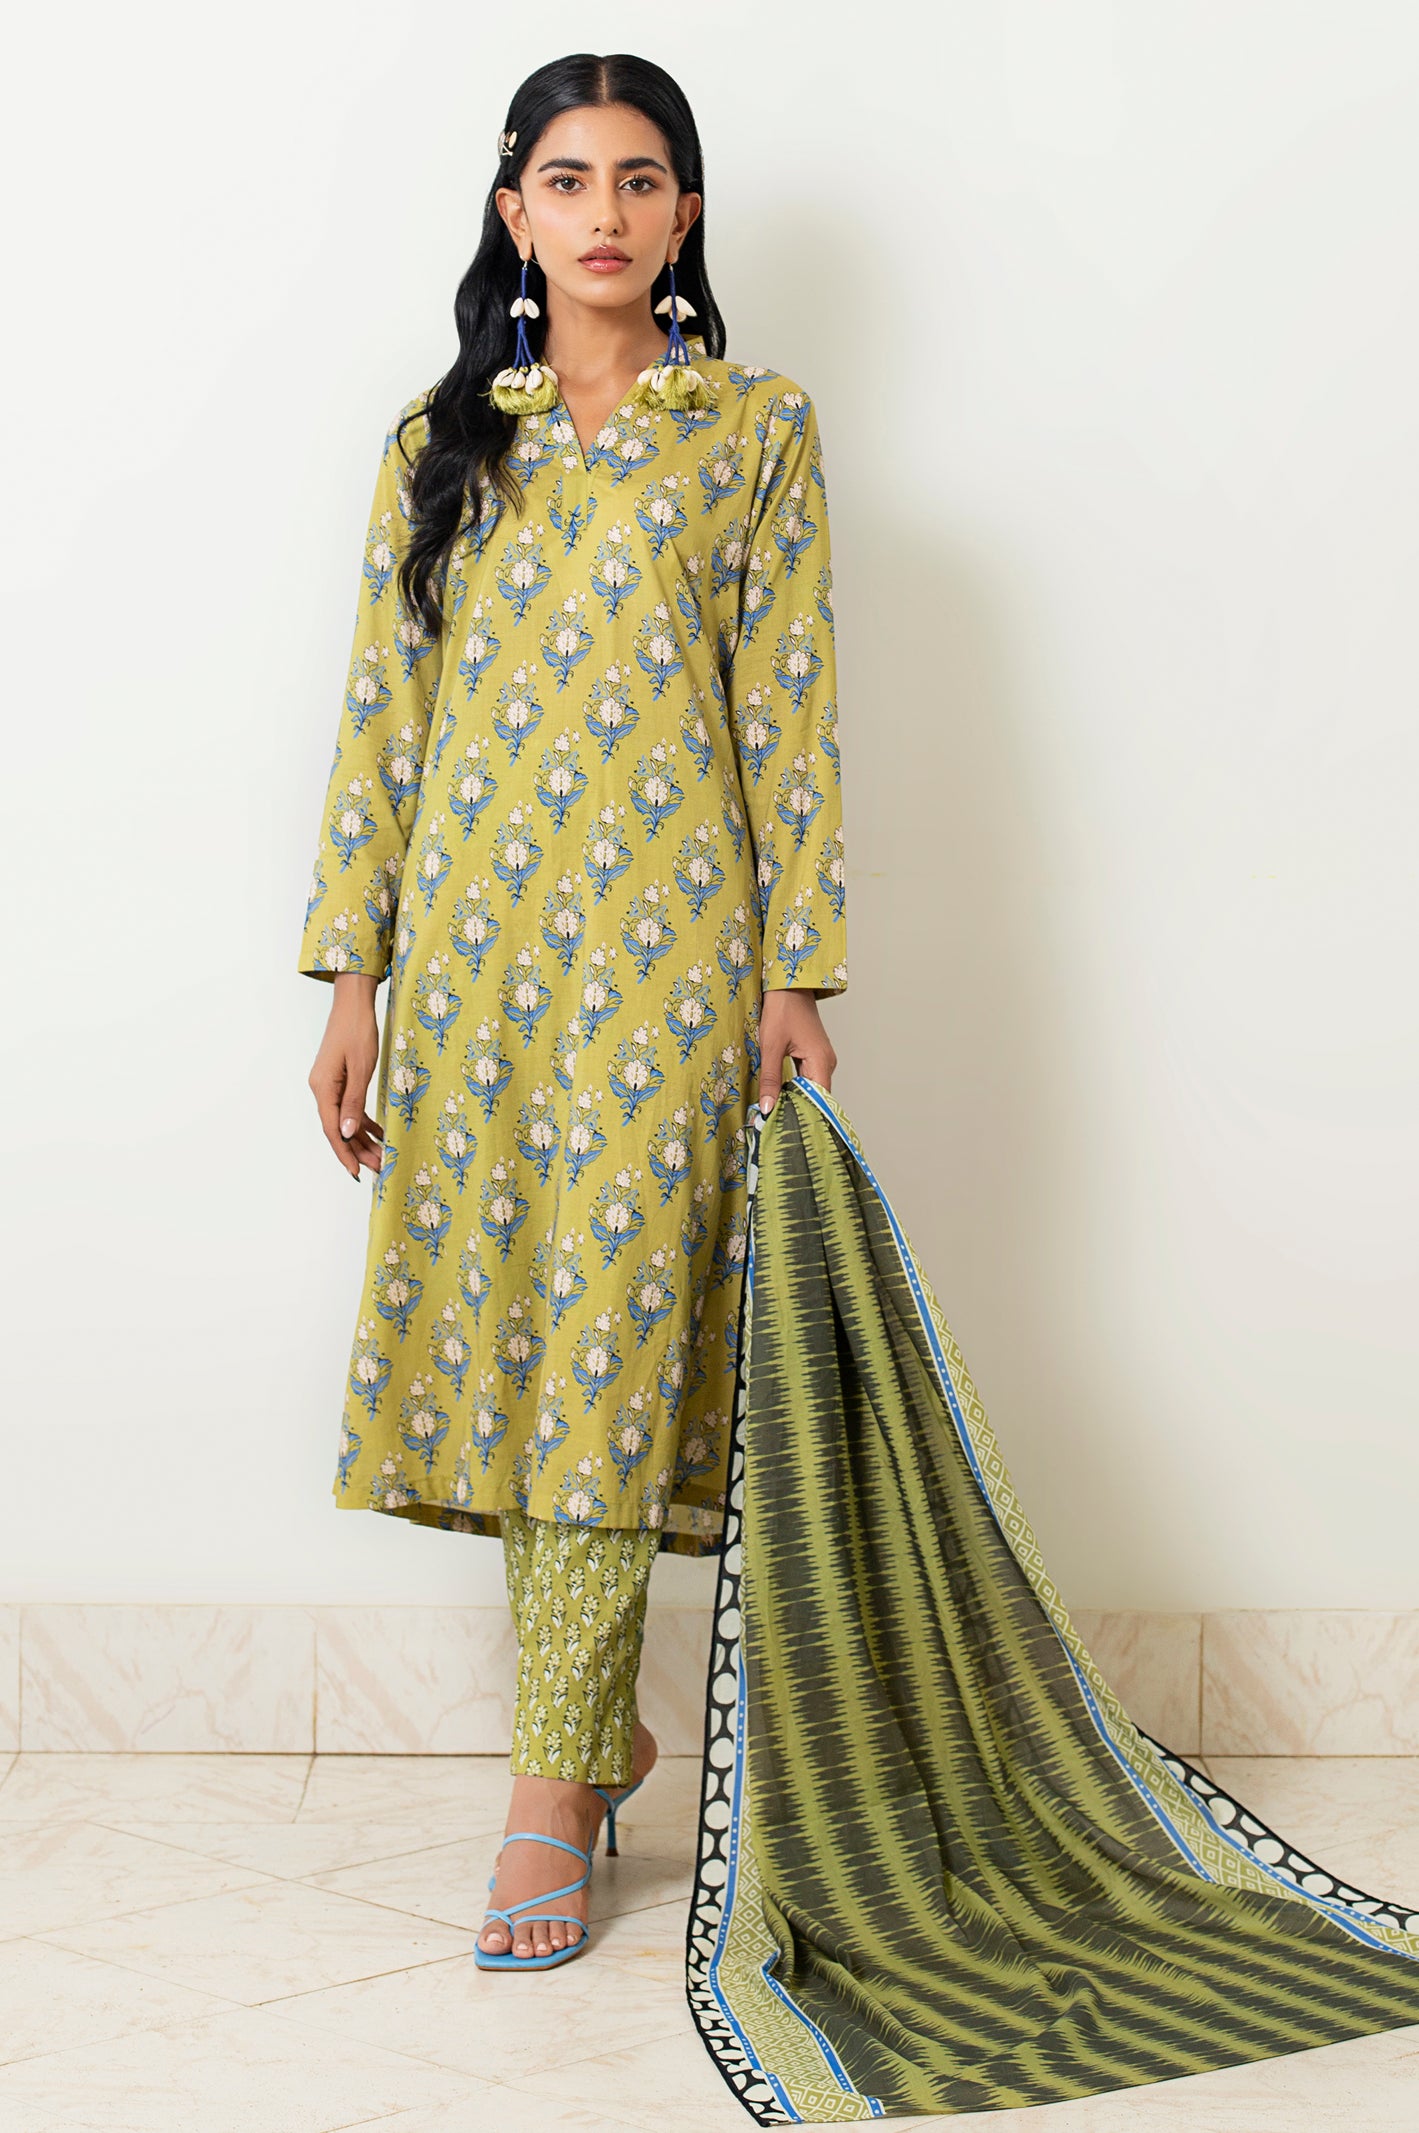 2PC Unstitched Printed Suit From Diners